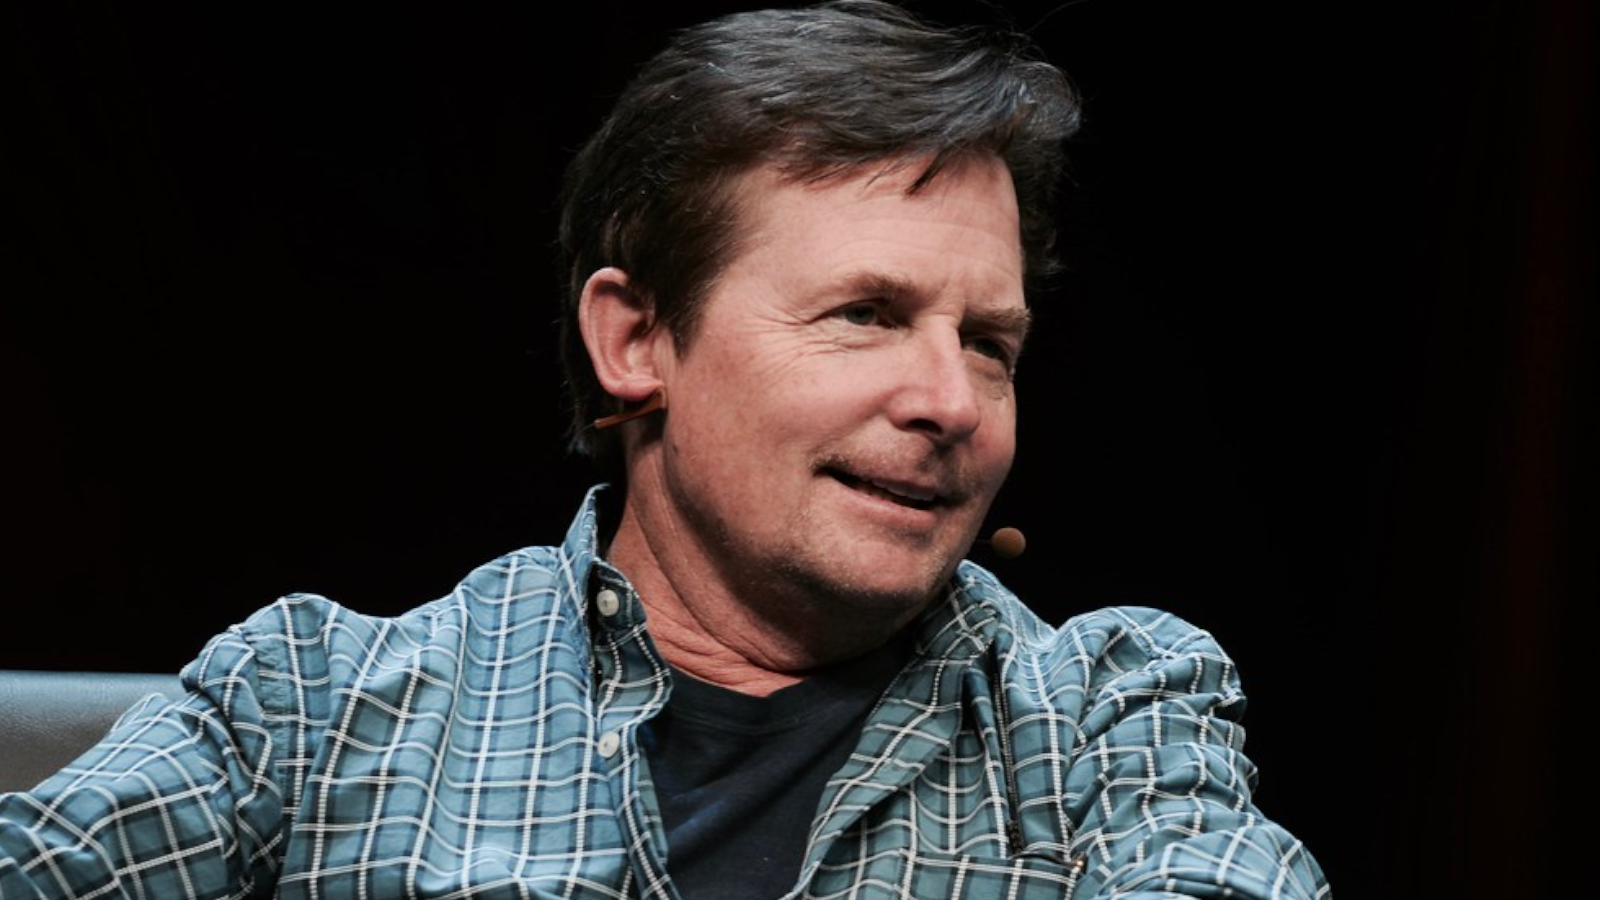 Michael J Fox Doesn’t Think He’ll Live to Age 80